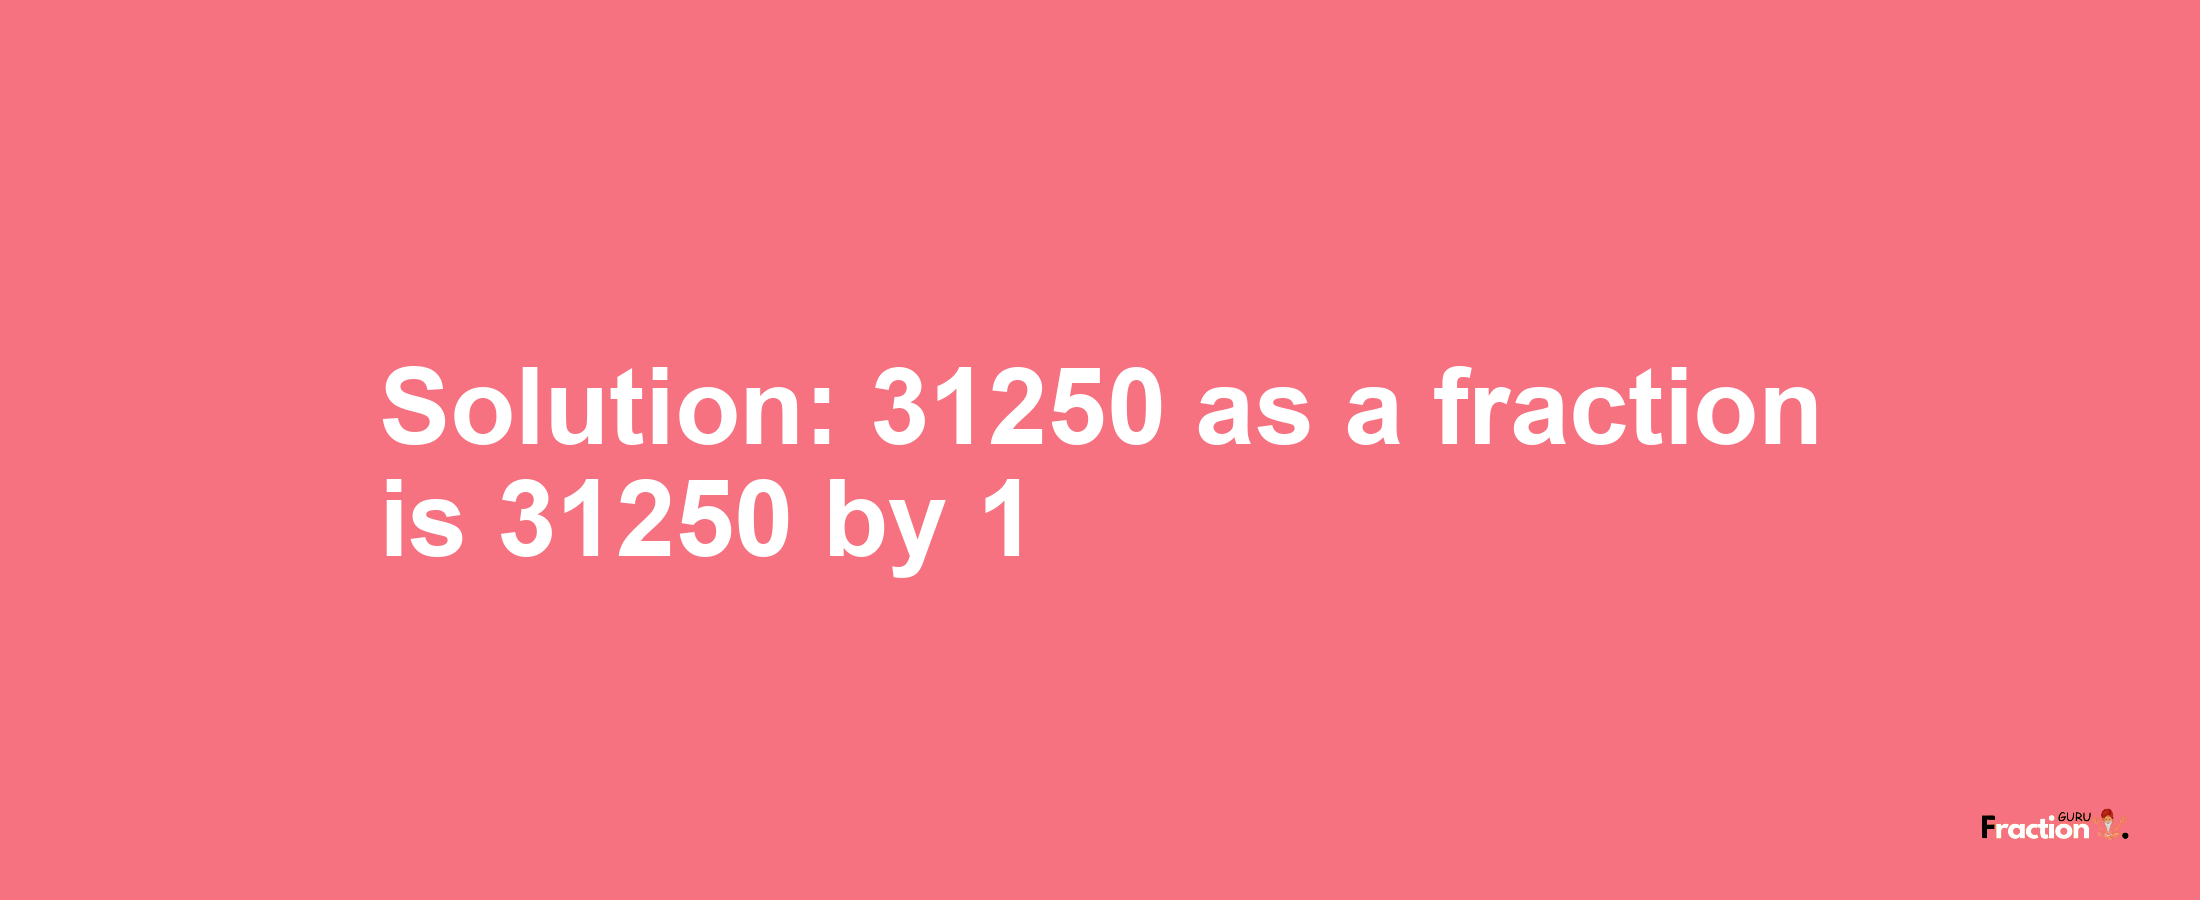 Solution:31250 as a fraction is 31250/1